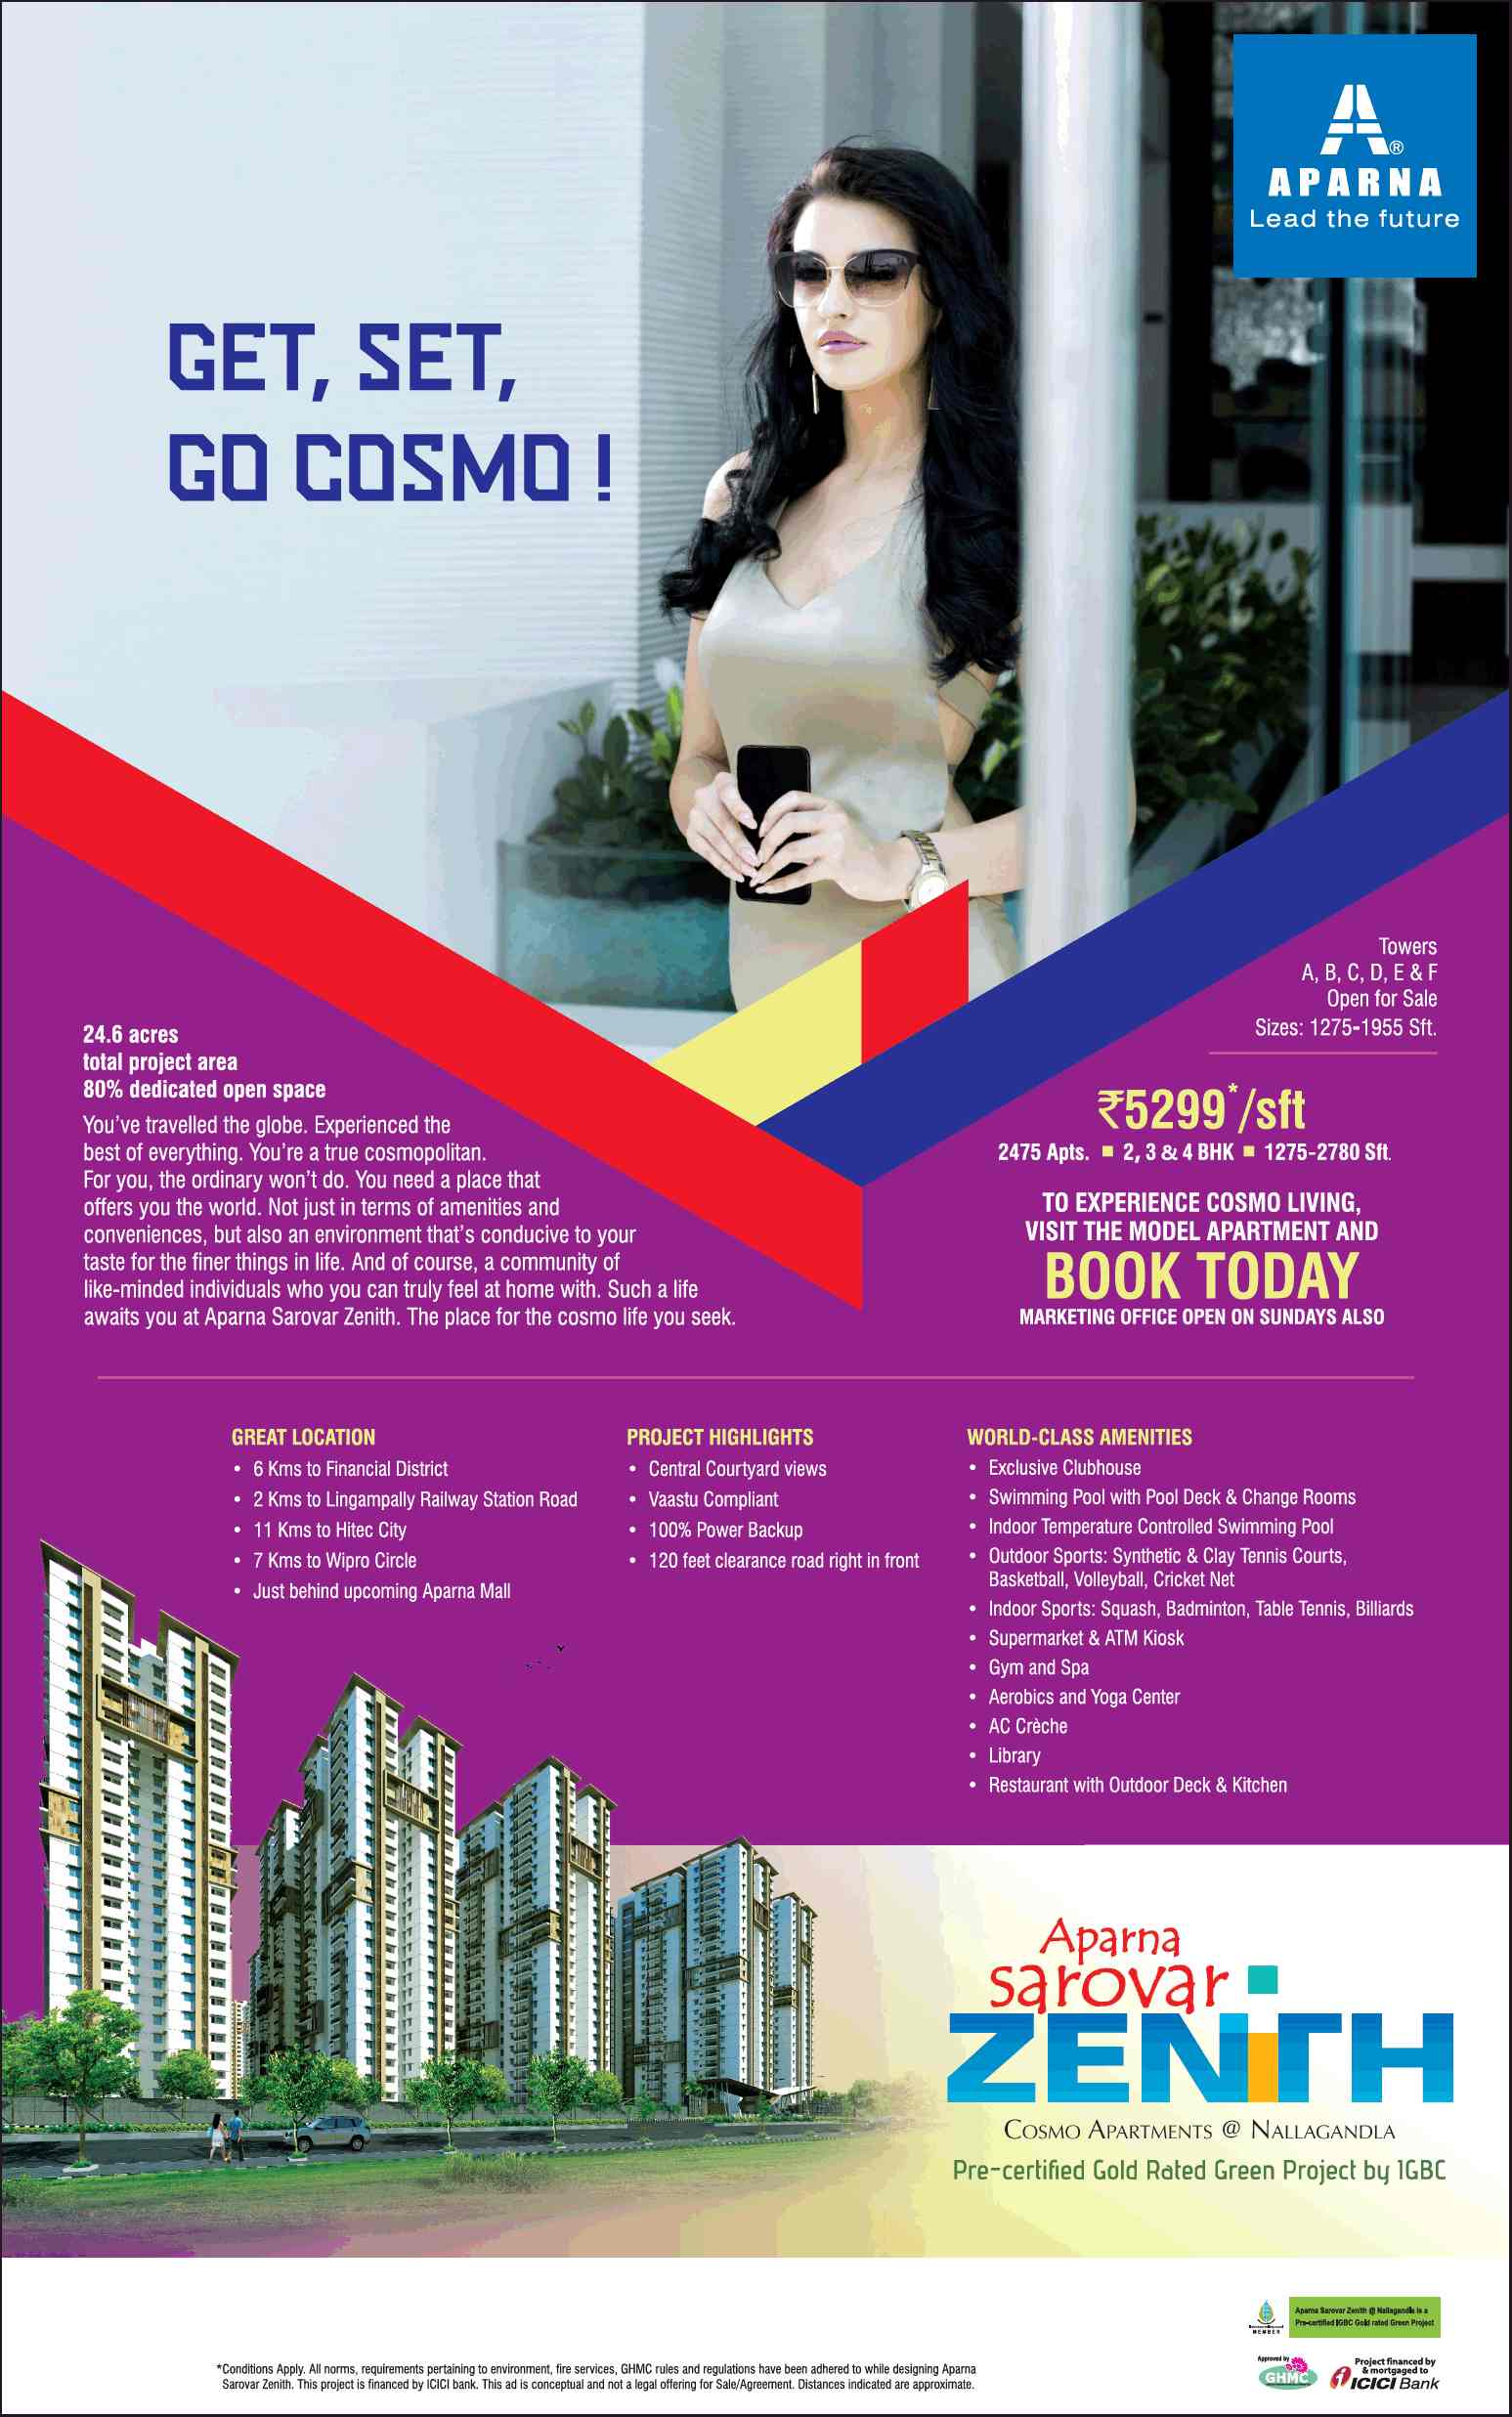 Book your home @ Rs 5299 per sqft at Aparna Sarovar Zenith in Hyderabad Update